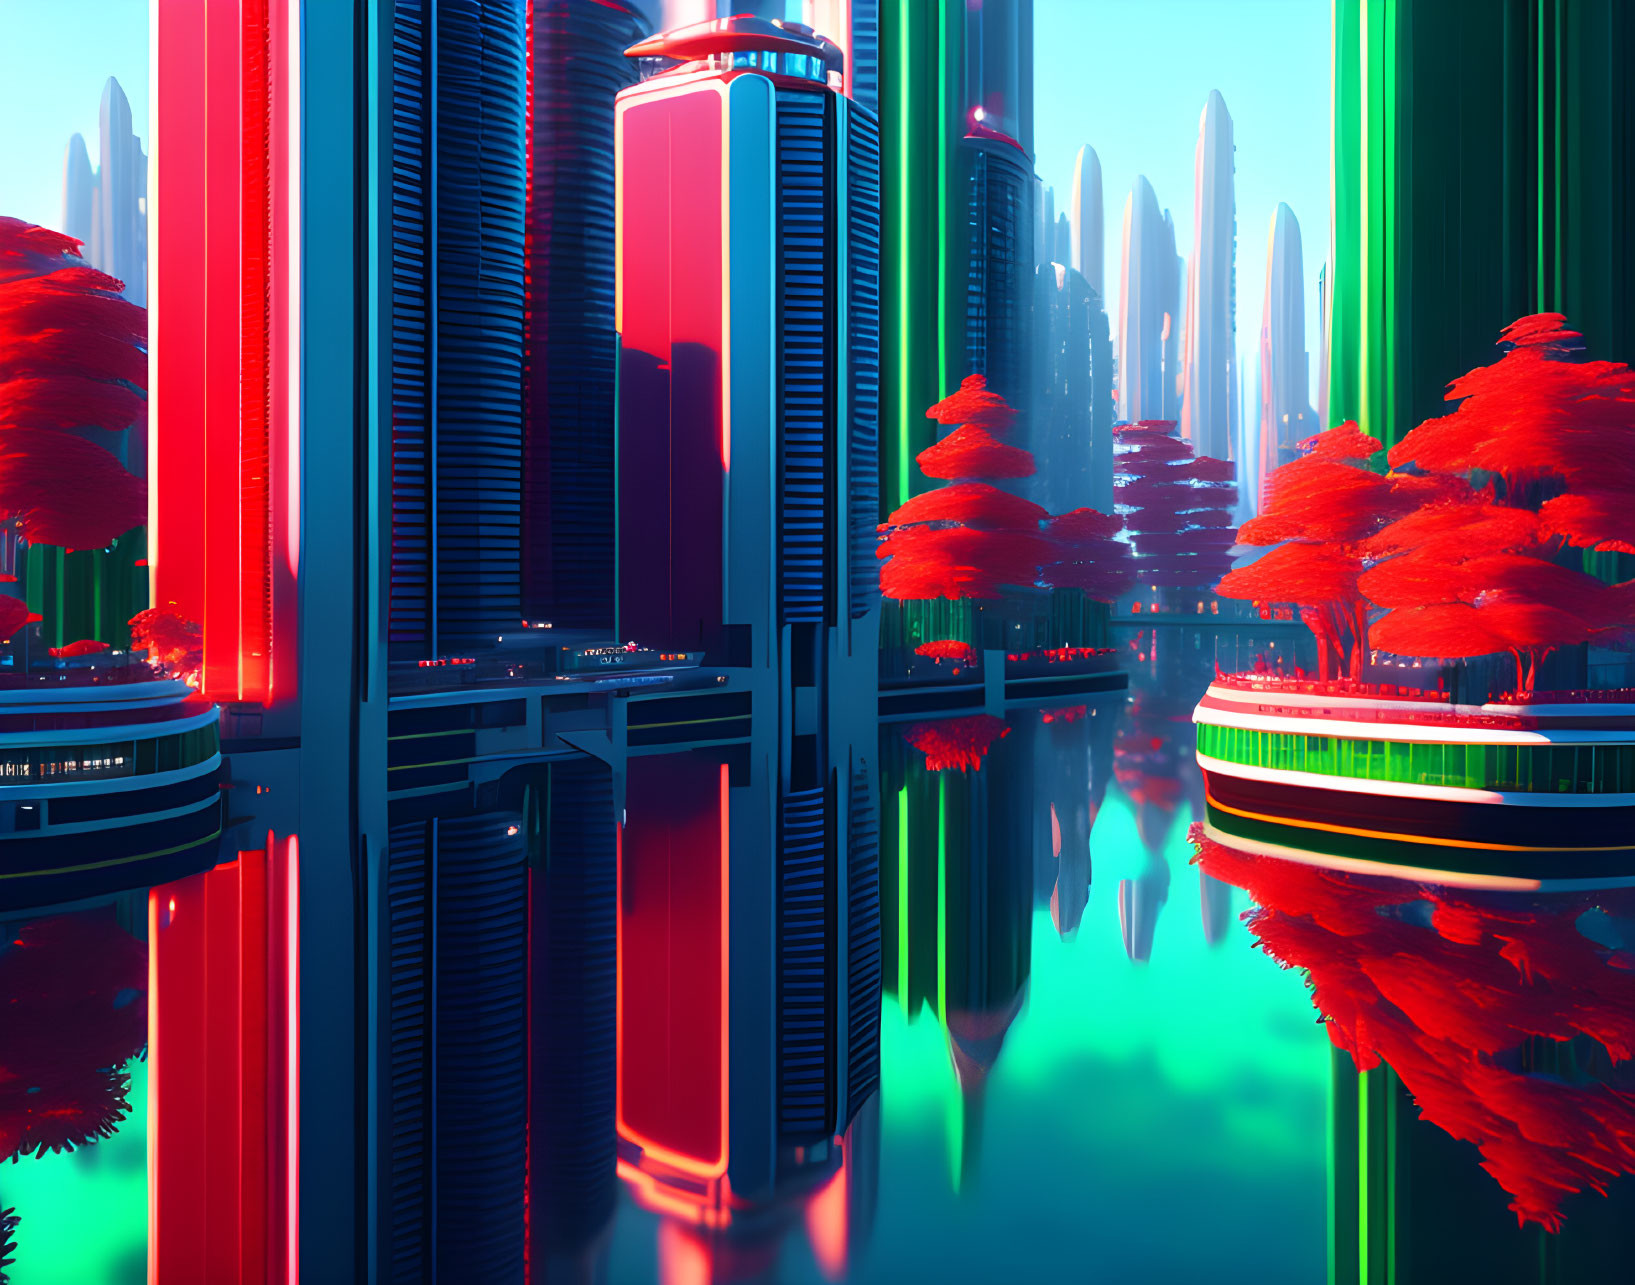 Futuristic cityscape with red foliage, turquoise water, and skyscrapers